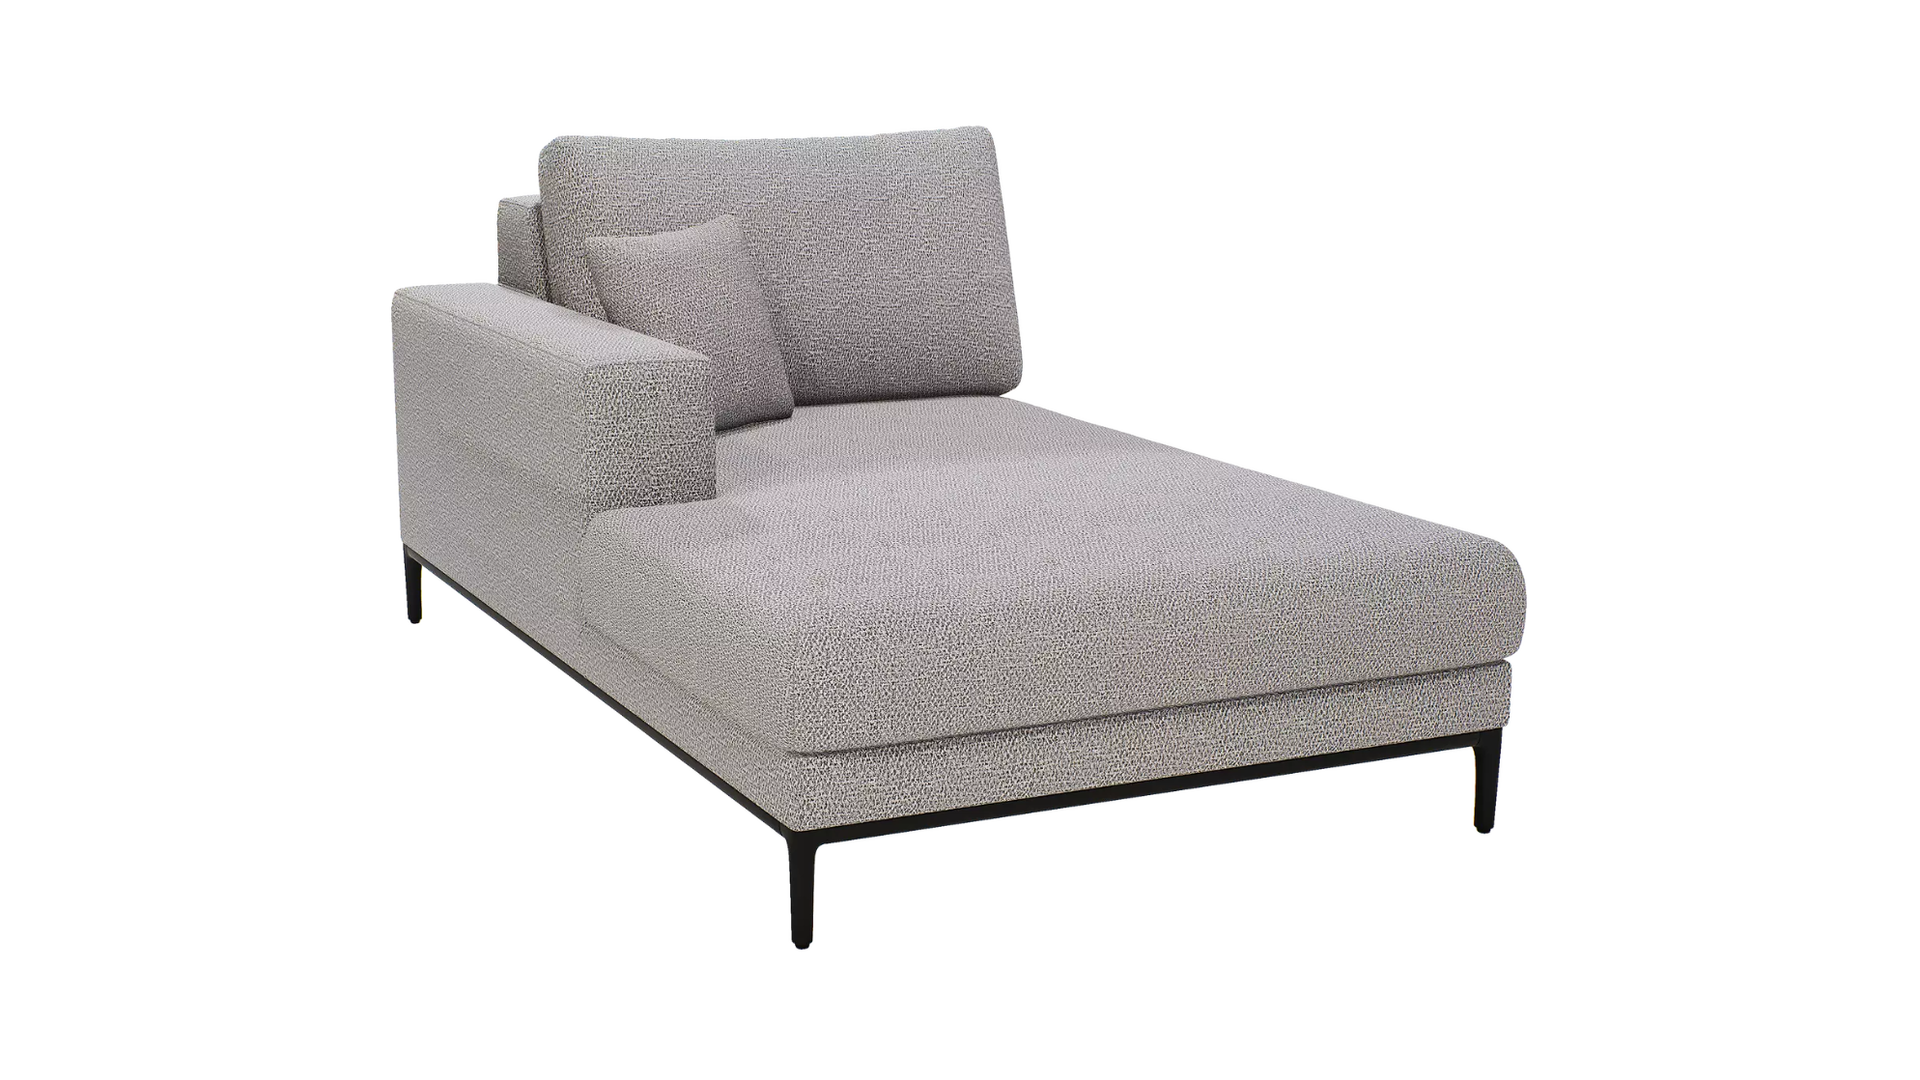 Manutti Zendo Sense meridienne right daybed rechts outdoor HORA Barneveld 1.png